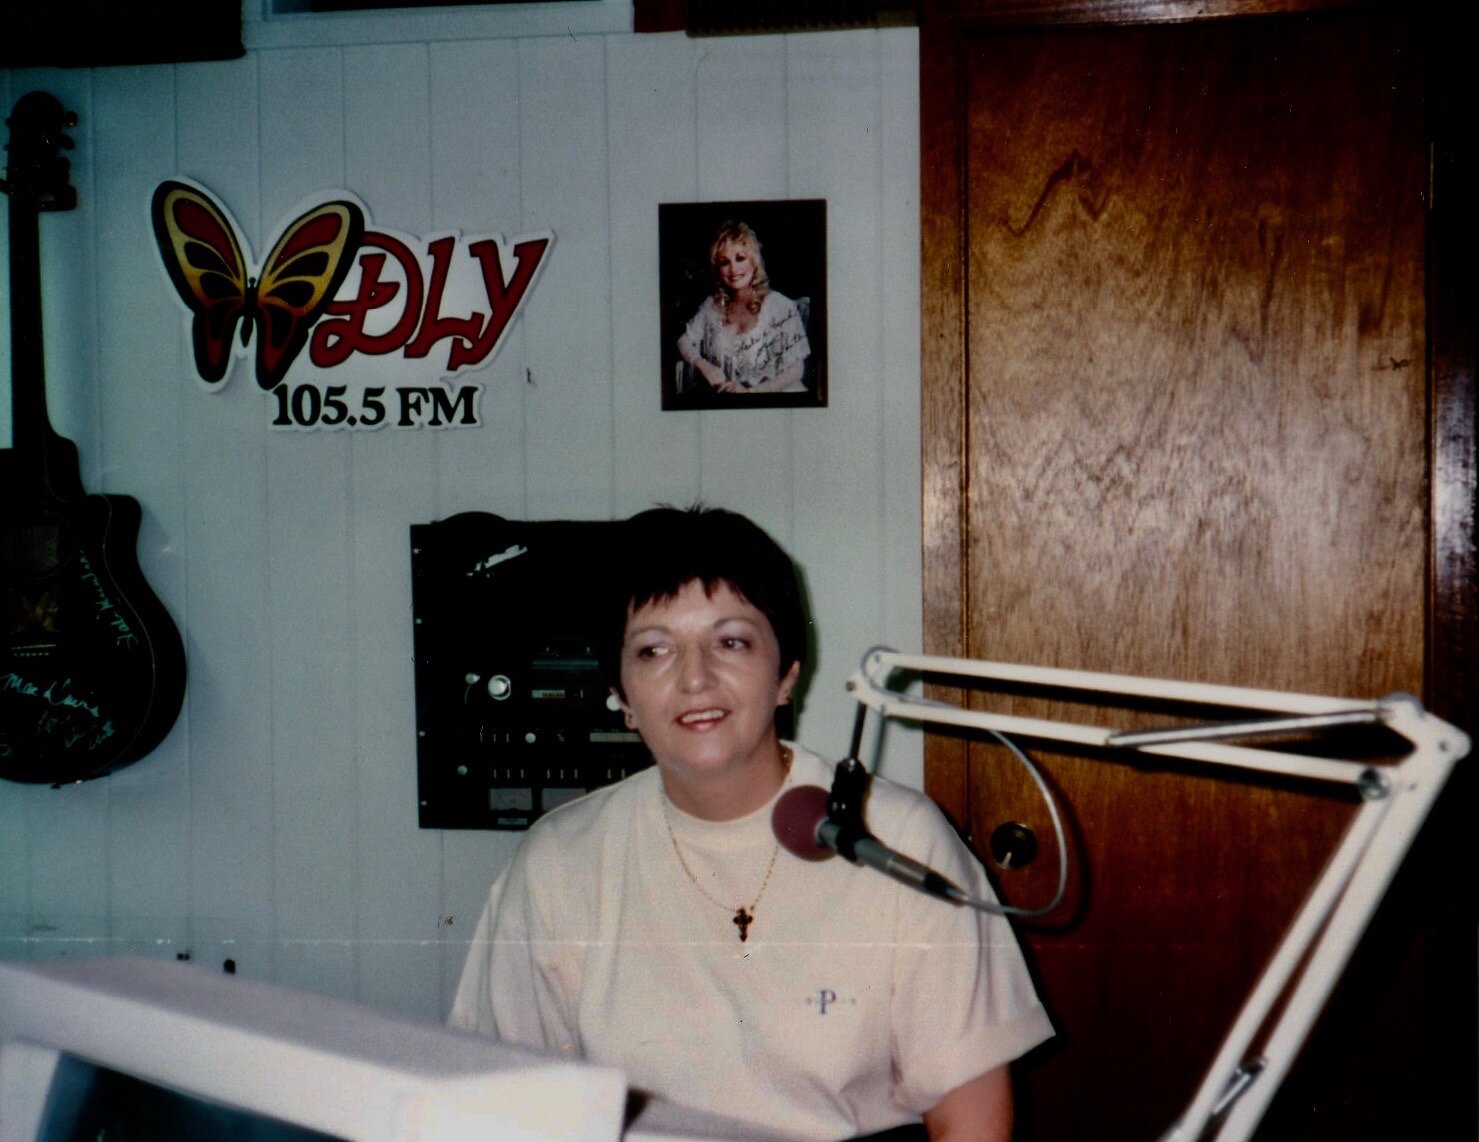  Dolly’s radio station “Dollywood” 1998 special  memories   . 